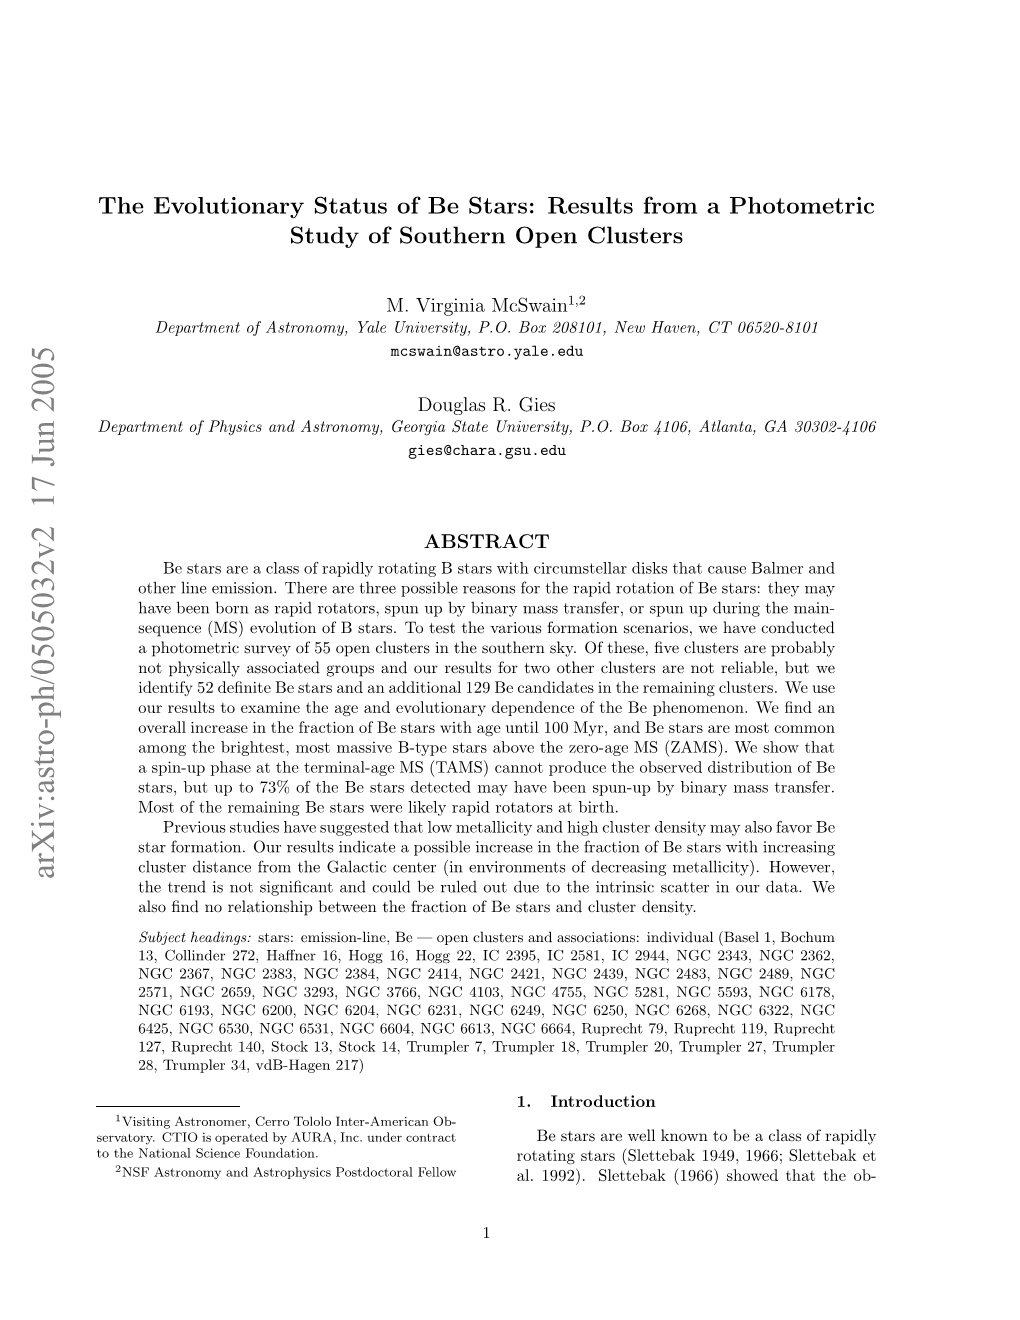 The Evolutionary Status of Be Stars: Results from a Photometric Study Of